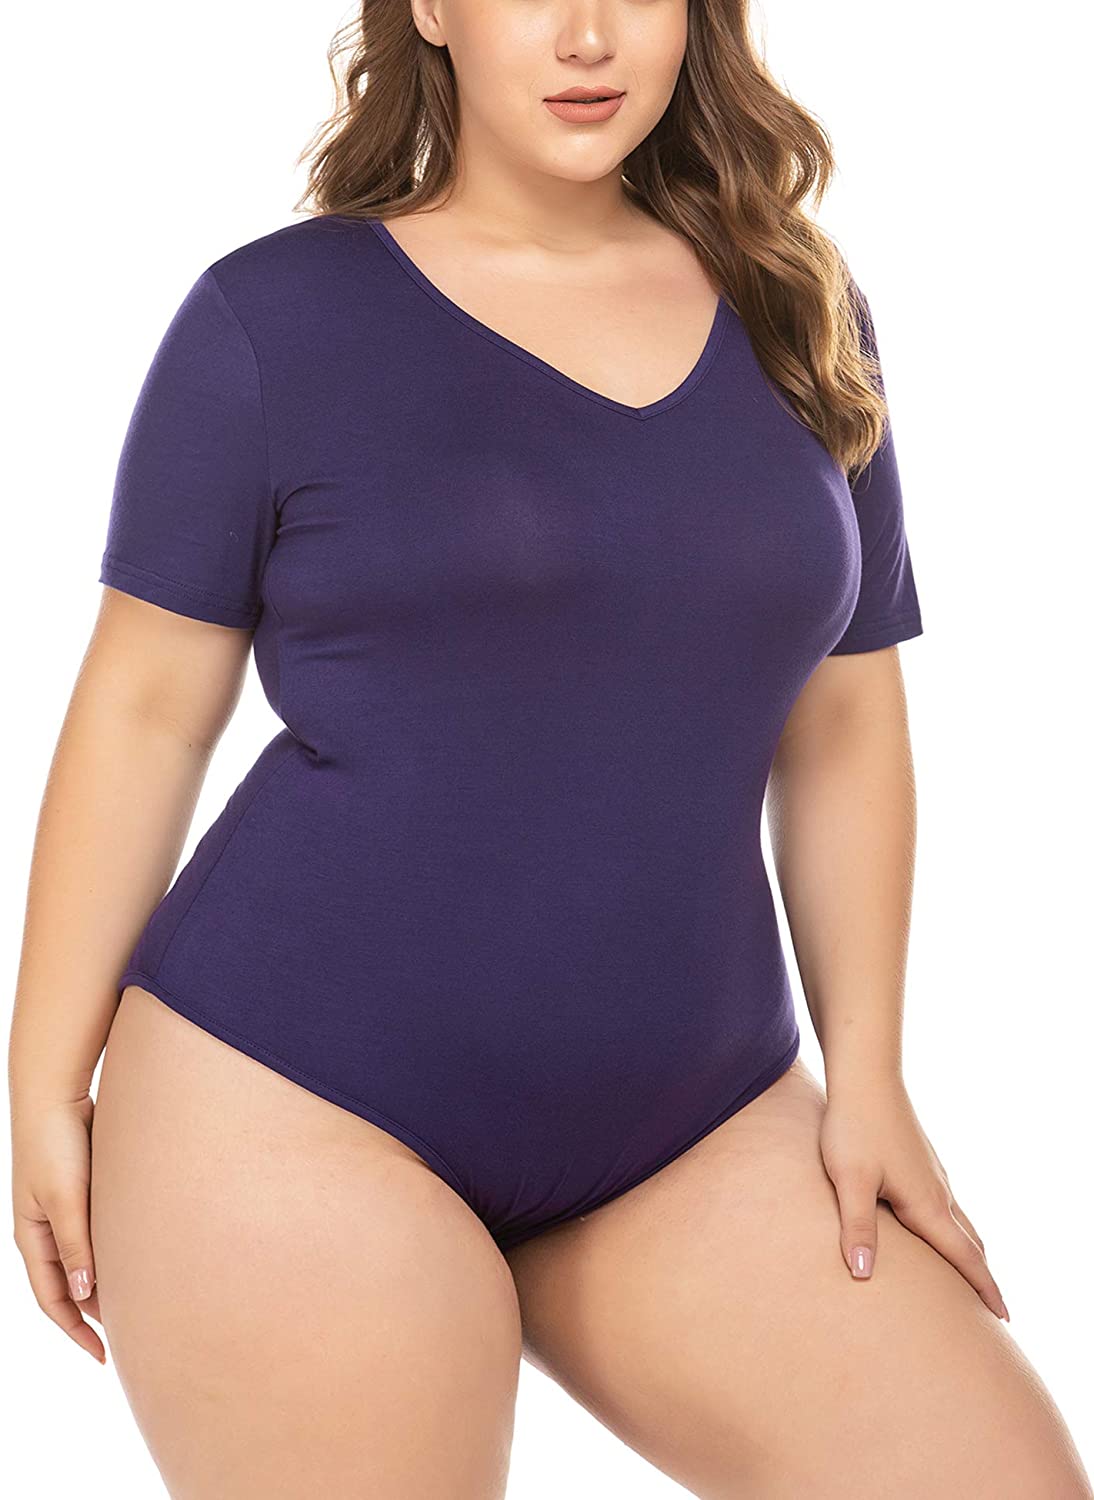 IN'VOLAND Womens Plus Size Bodysuit Long Sleeve Stretchy Leotard